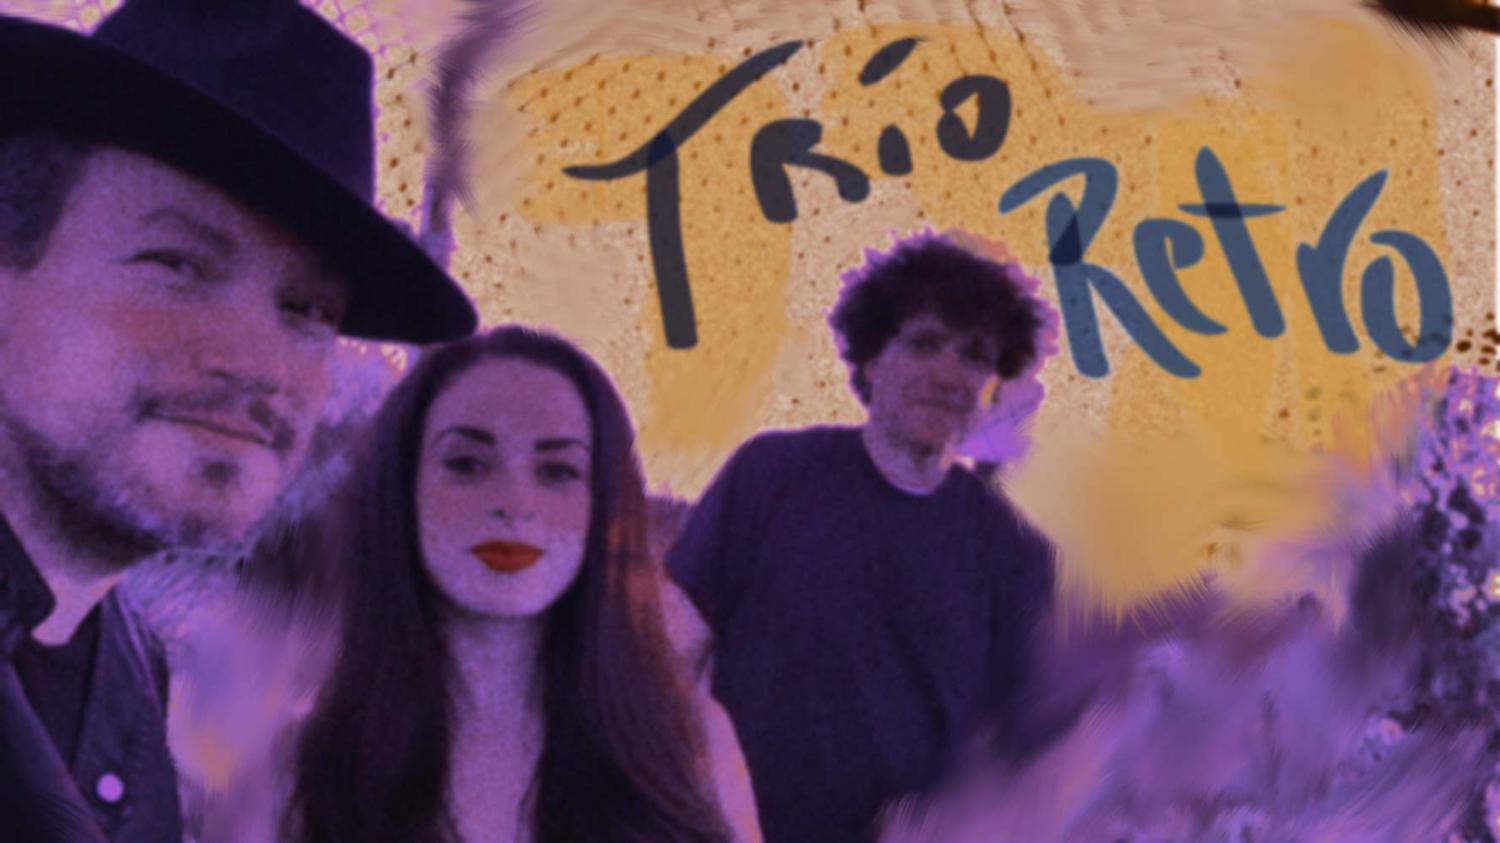 Trio Retro, international jazz and multi language vocal group, featuring Asdru Sierra (vocals and trumpet), Cindy Gomez (vocals) and Anthony Marinelli (piano), Encino, CA, 2017